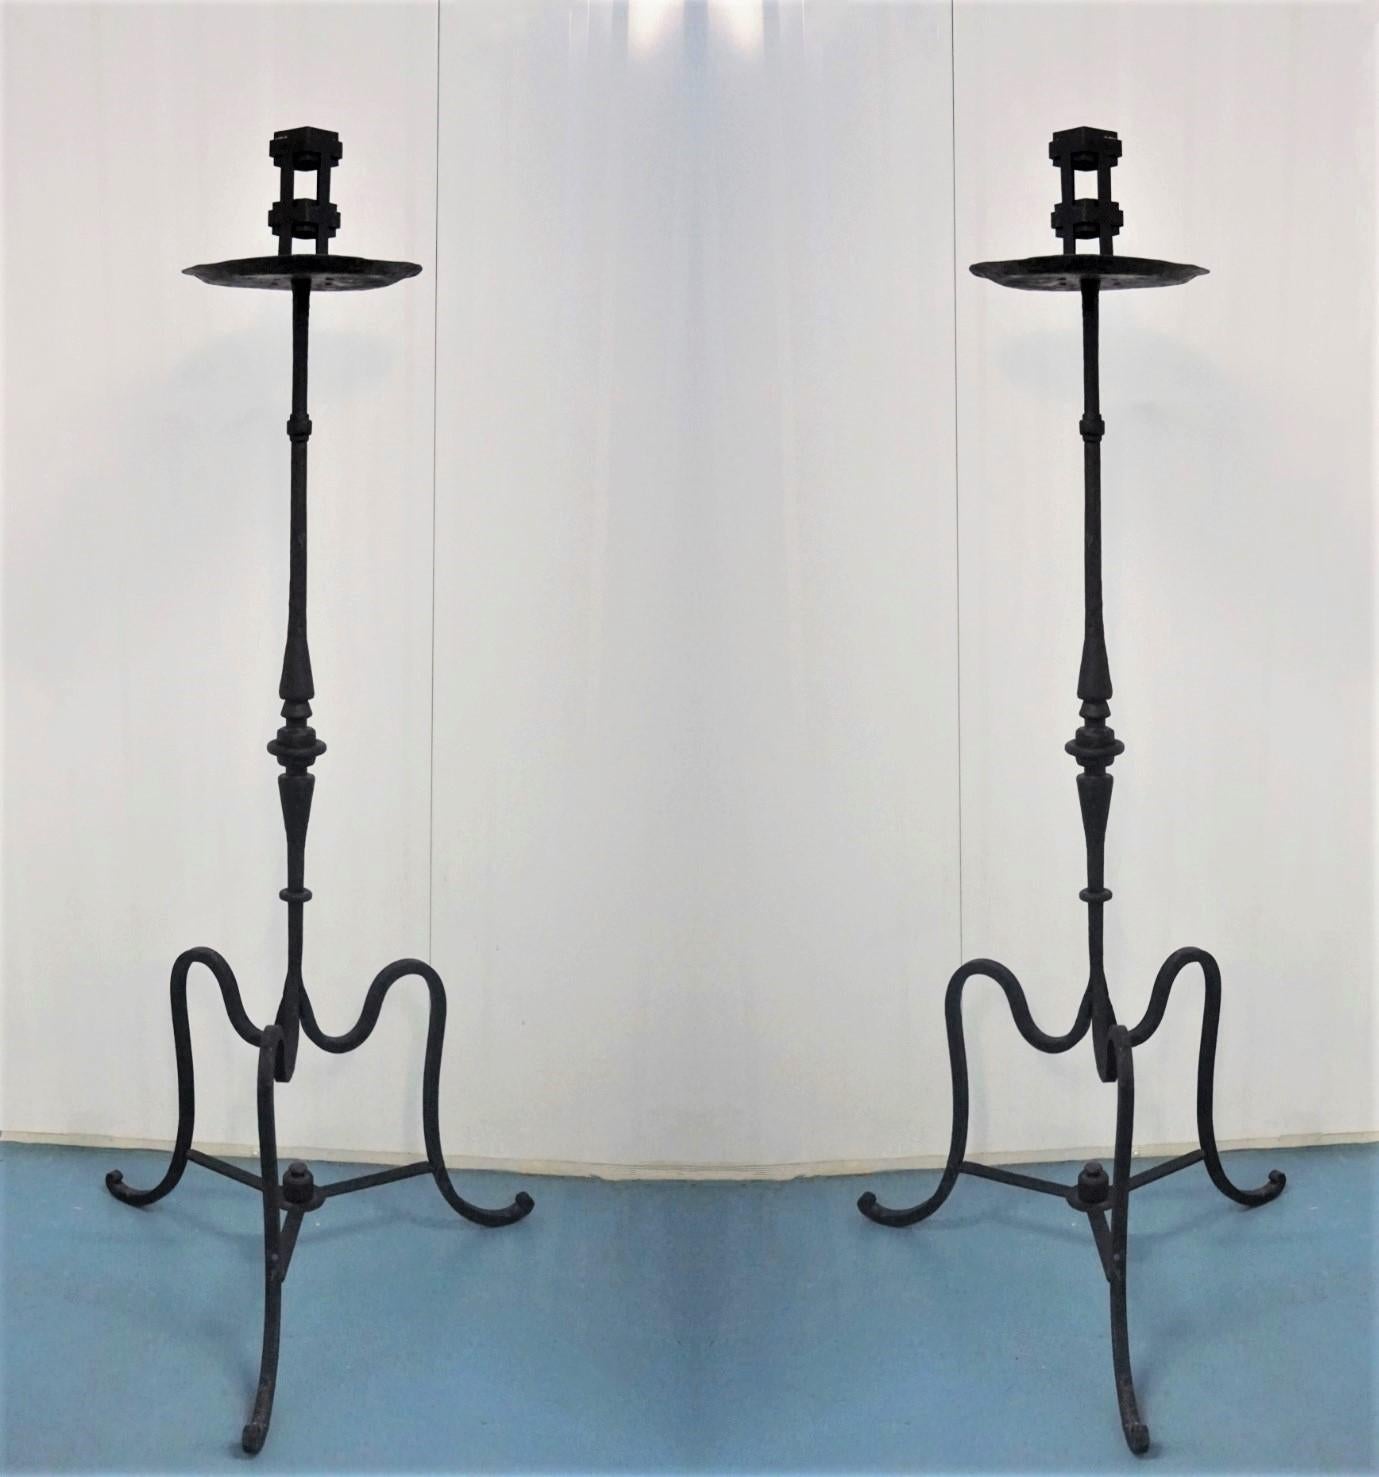 Great pair of Italian Renaissance Revival wrought iron church torchères raised on a large tripod base, early 19th-century. The candleholders are finely handcrafted with elegant detailing and are black painted. Both pieces are in good condition, with